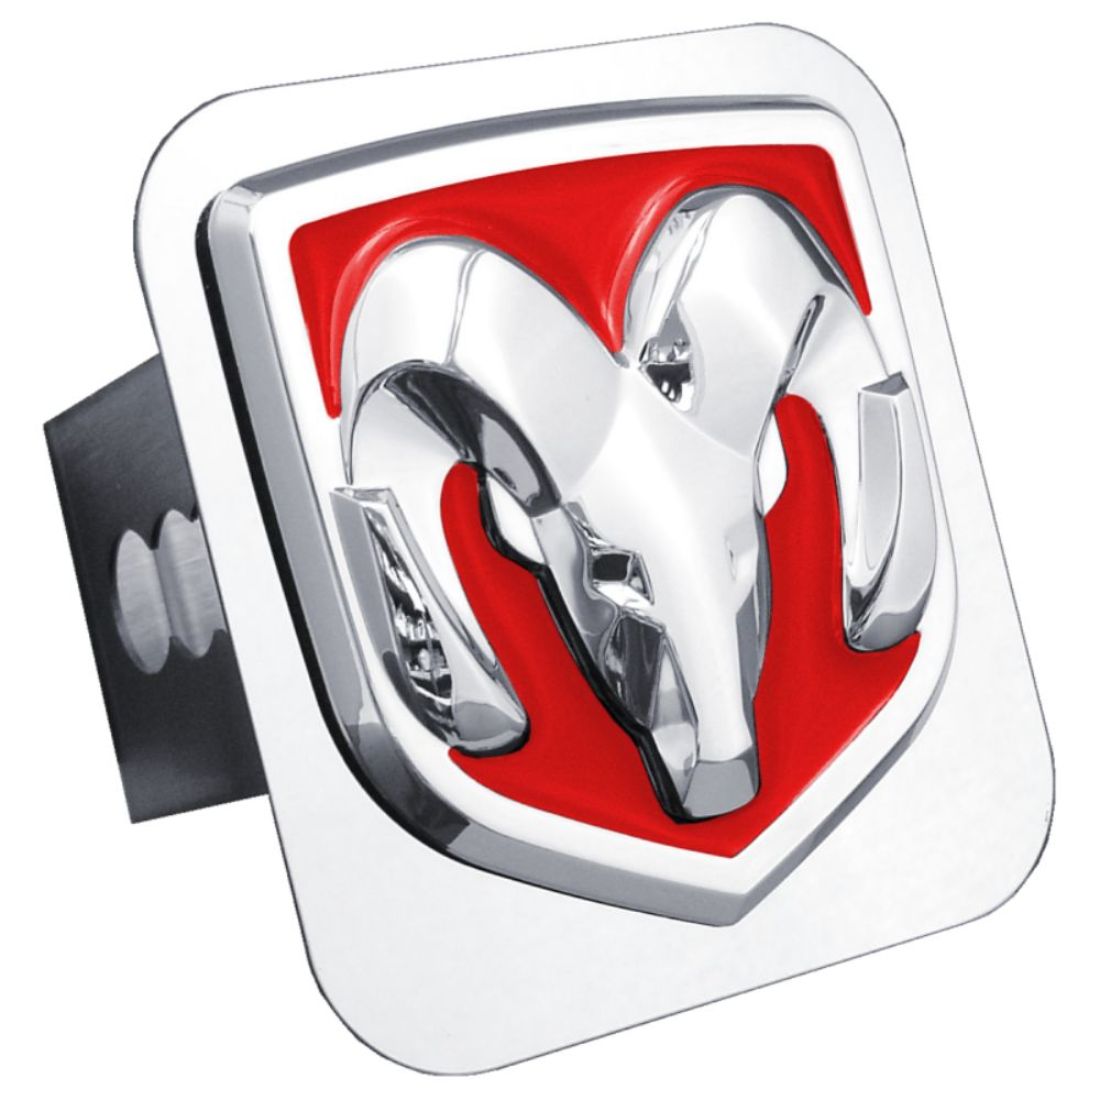 Dodge Ram Red and Chrome Stainless Steel 2" Trailer Tow Hitch Cover | eBay